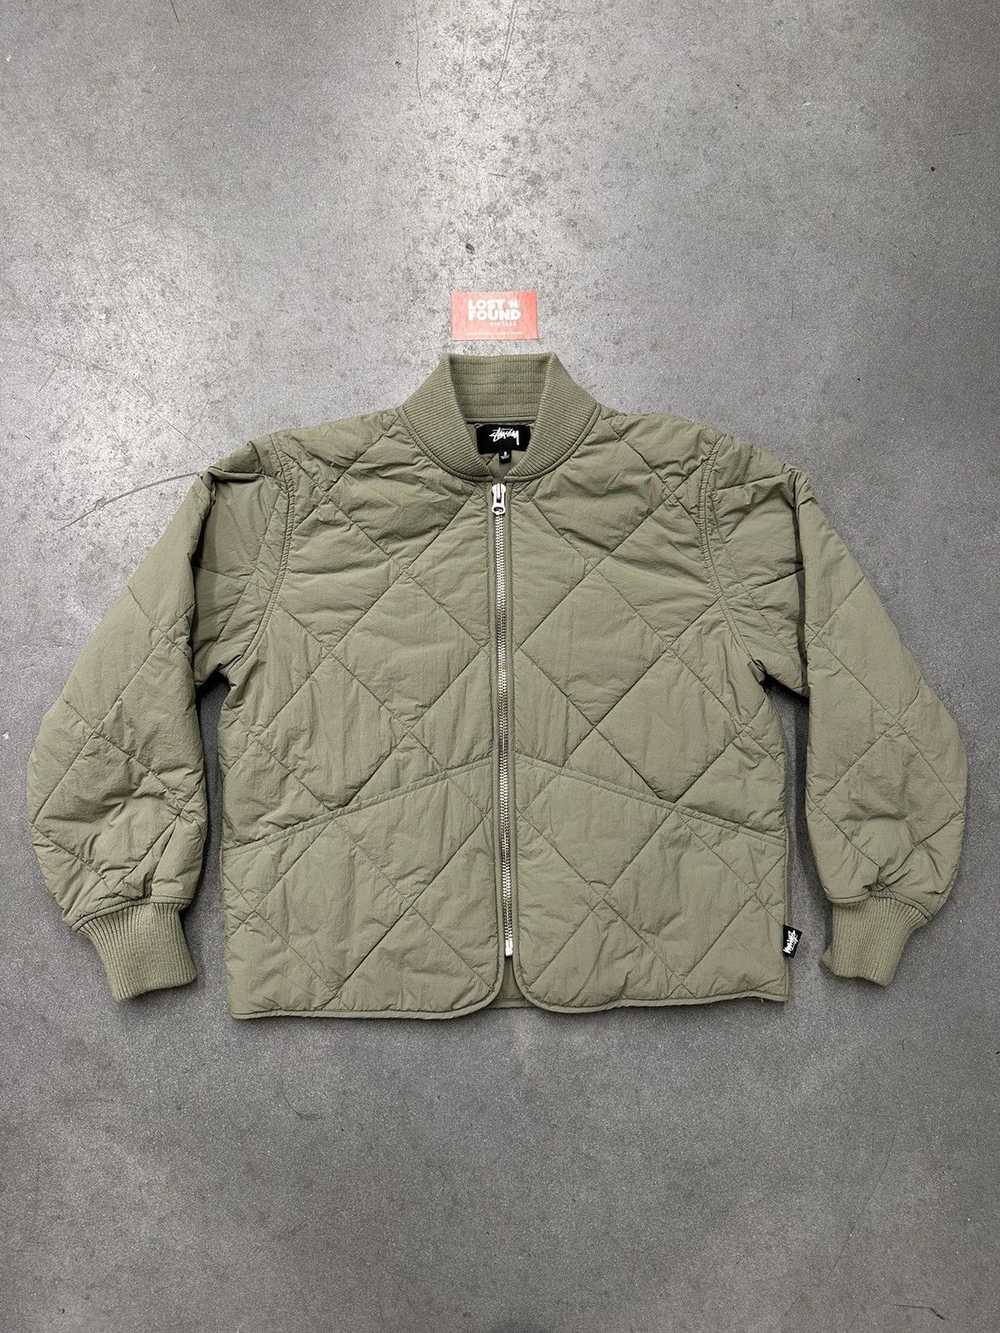 Stussy Stussy Dice Quilted Bomber Jacket - image 2